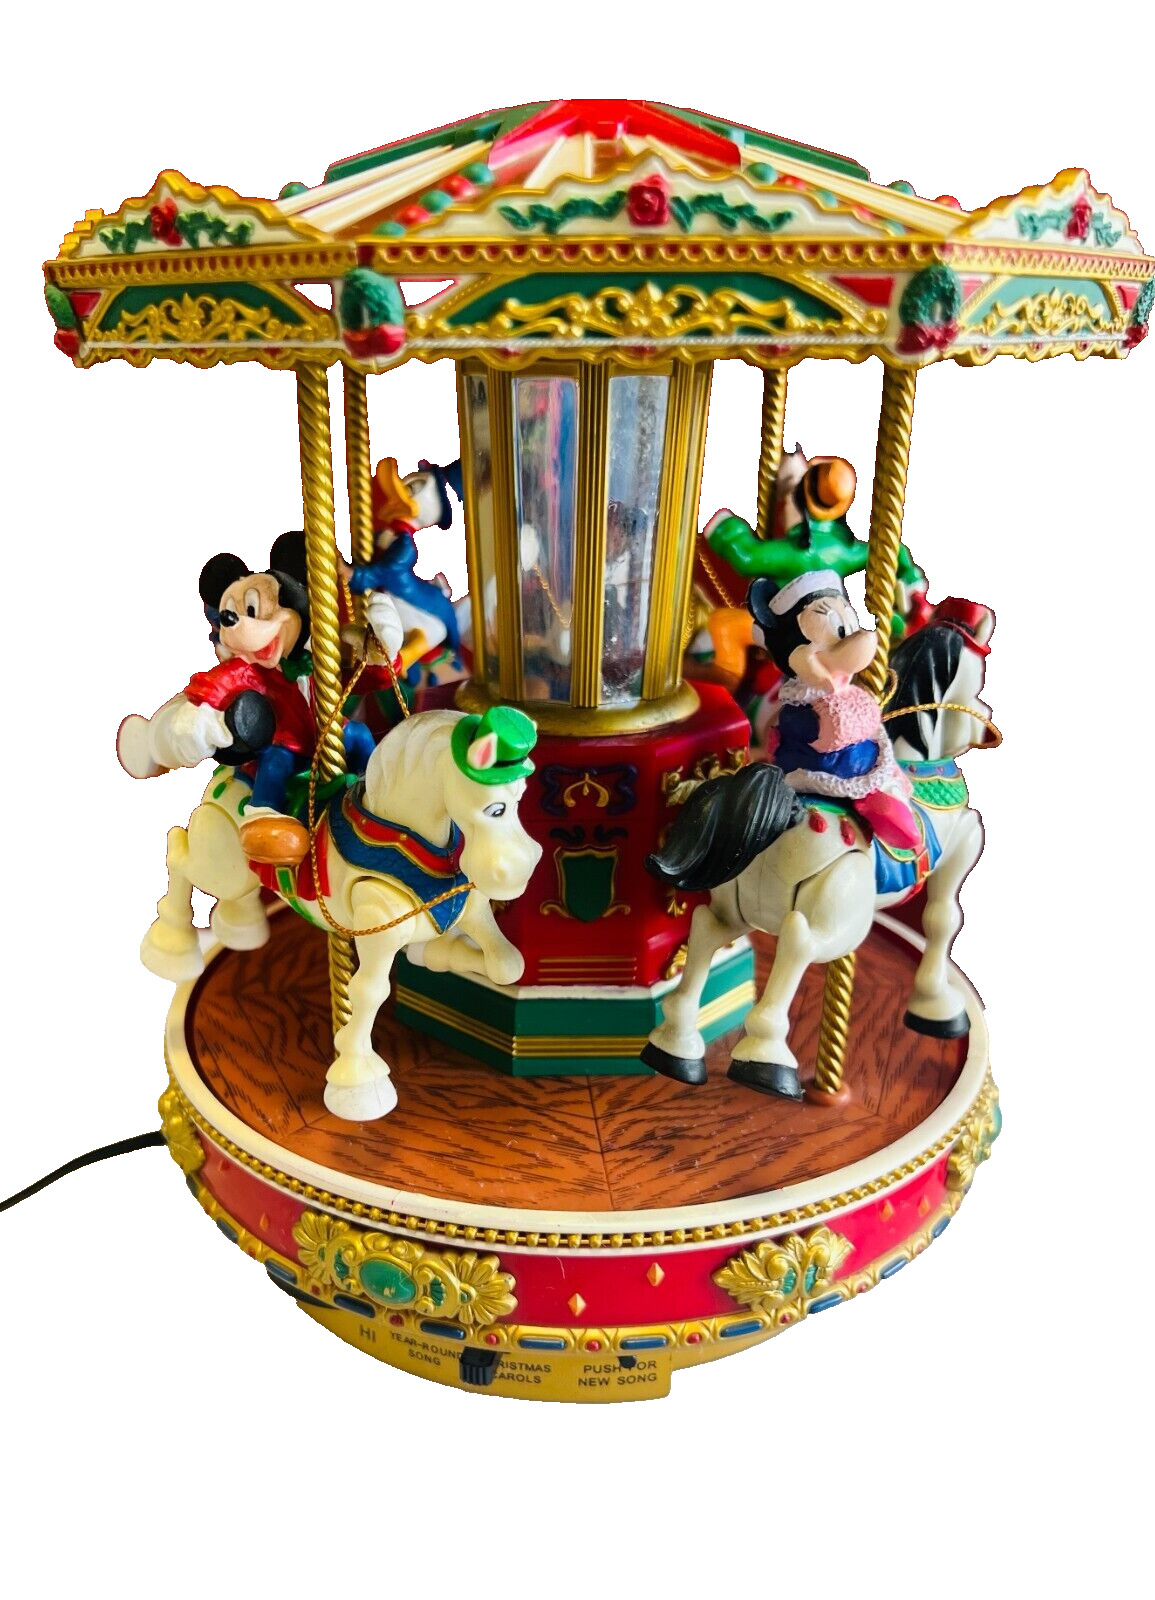 A Mickey Holiday Go Round Music Christmas Carousel 1996 -Missing The Top Piece